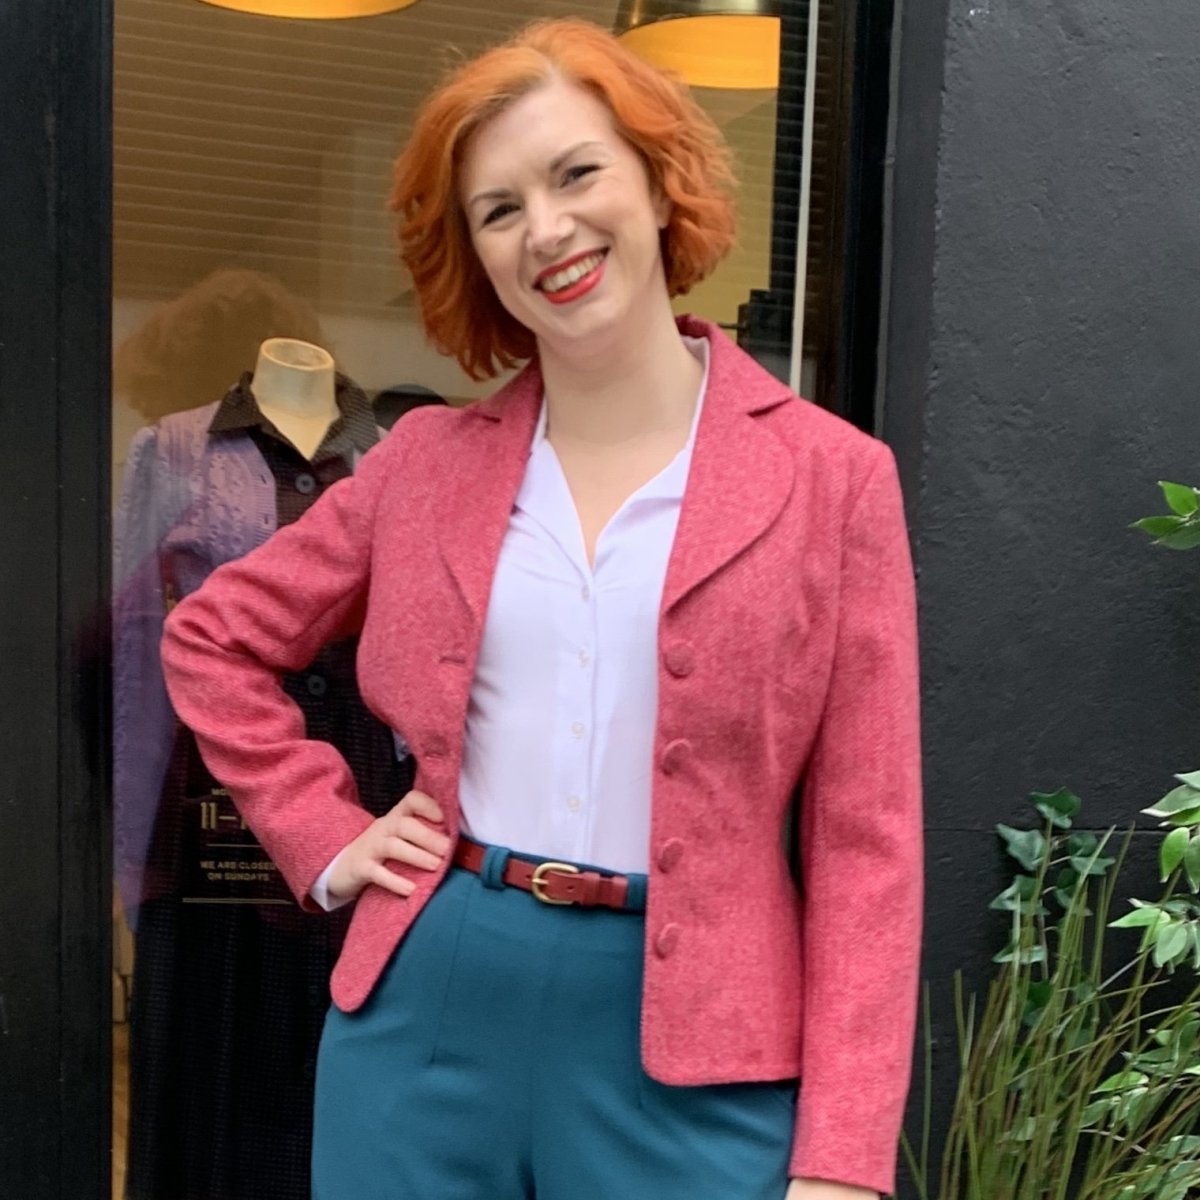 Jacket to fit bigger bust on a curvy shape white woman with ginger hair who poses with one hand on hip